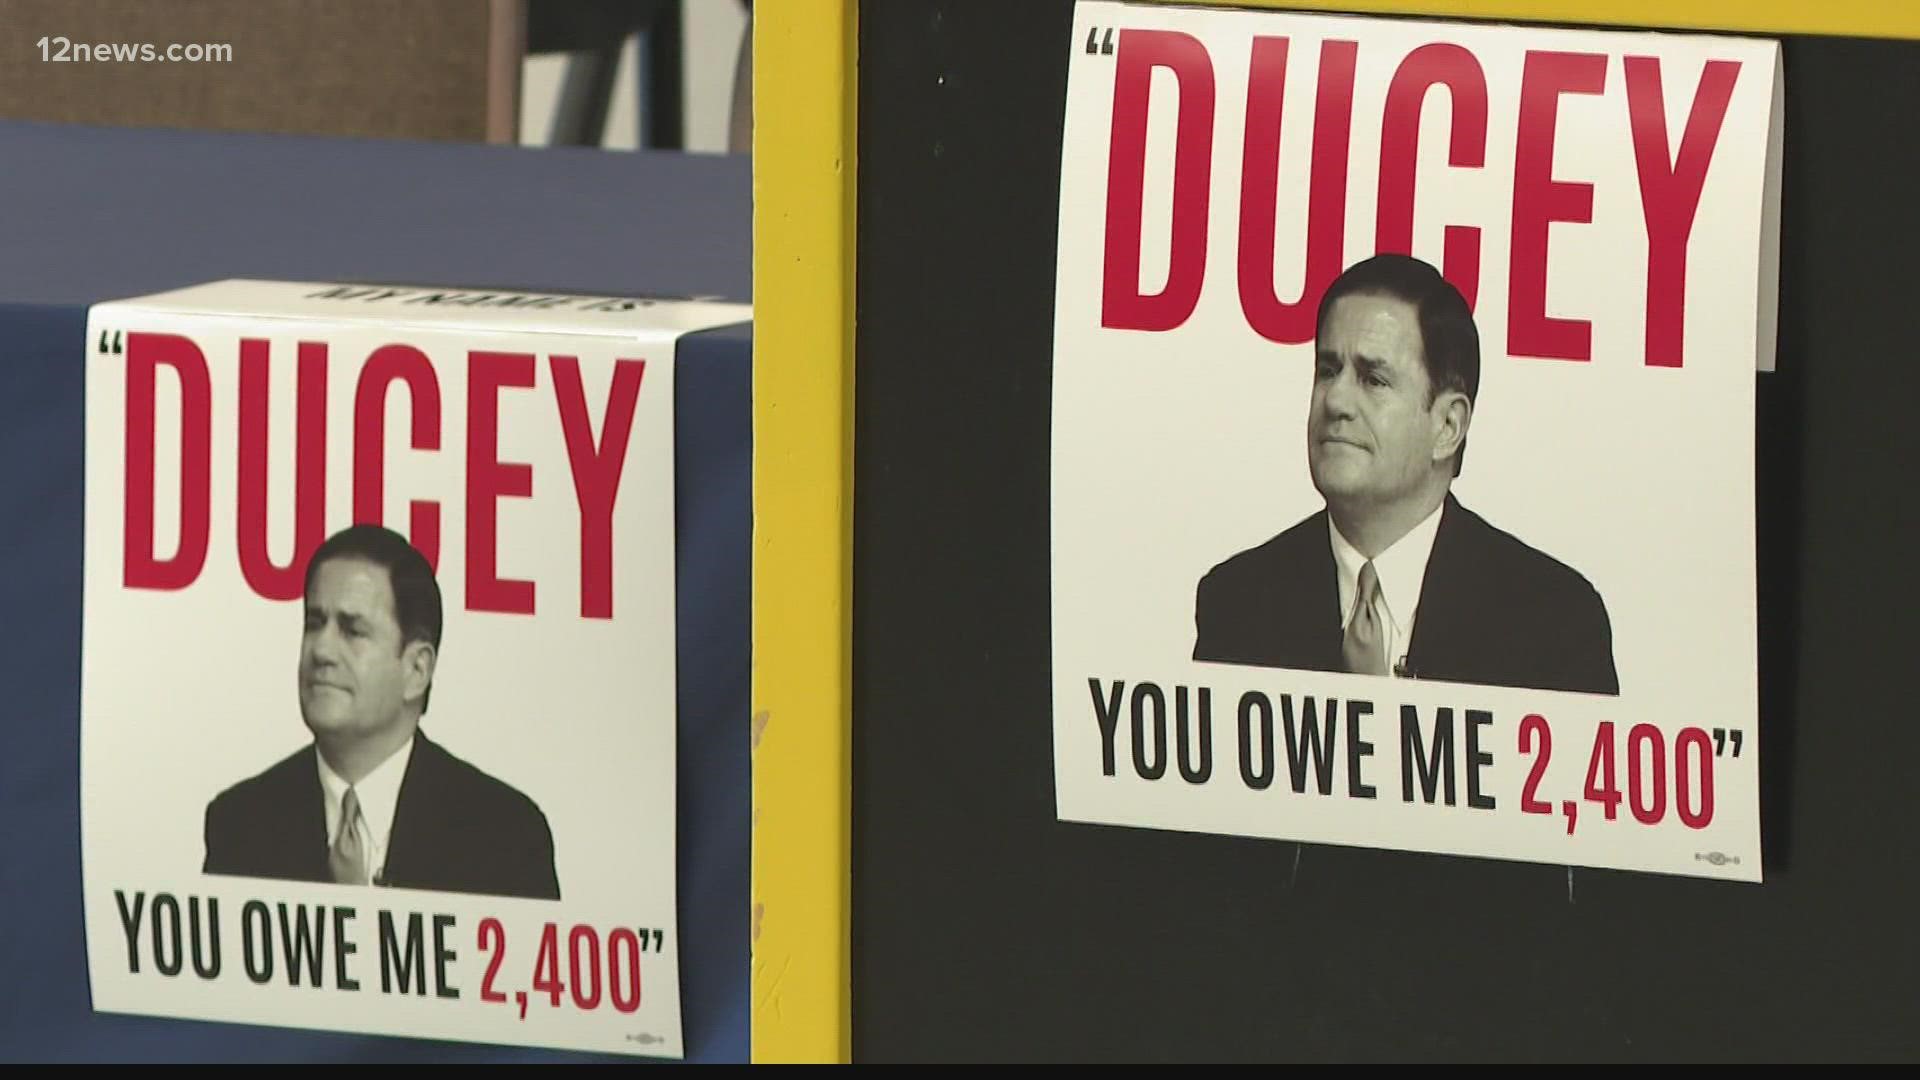 Unemployed Workers United has filed suit against Governor Ducey because he opted out of unemployment programs earlier than the federal deadline.